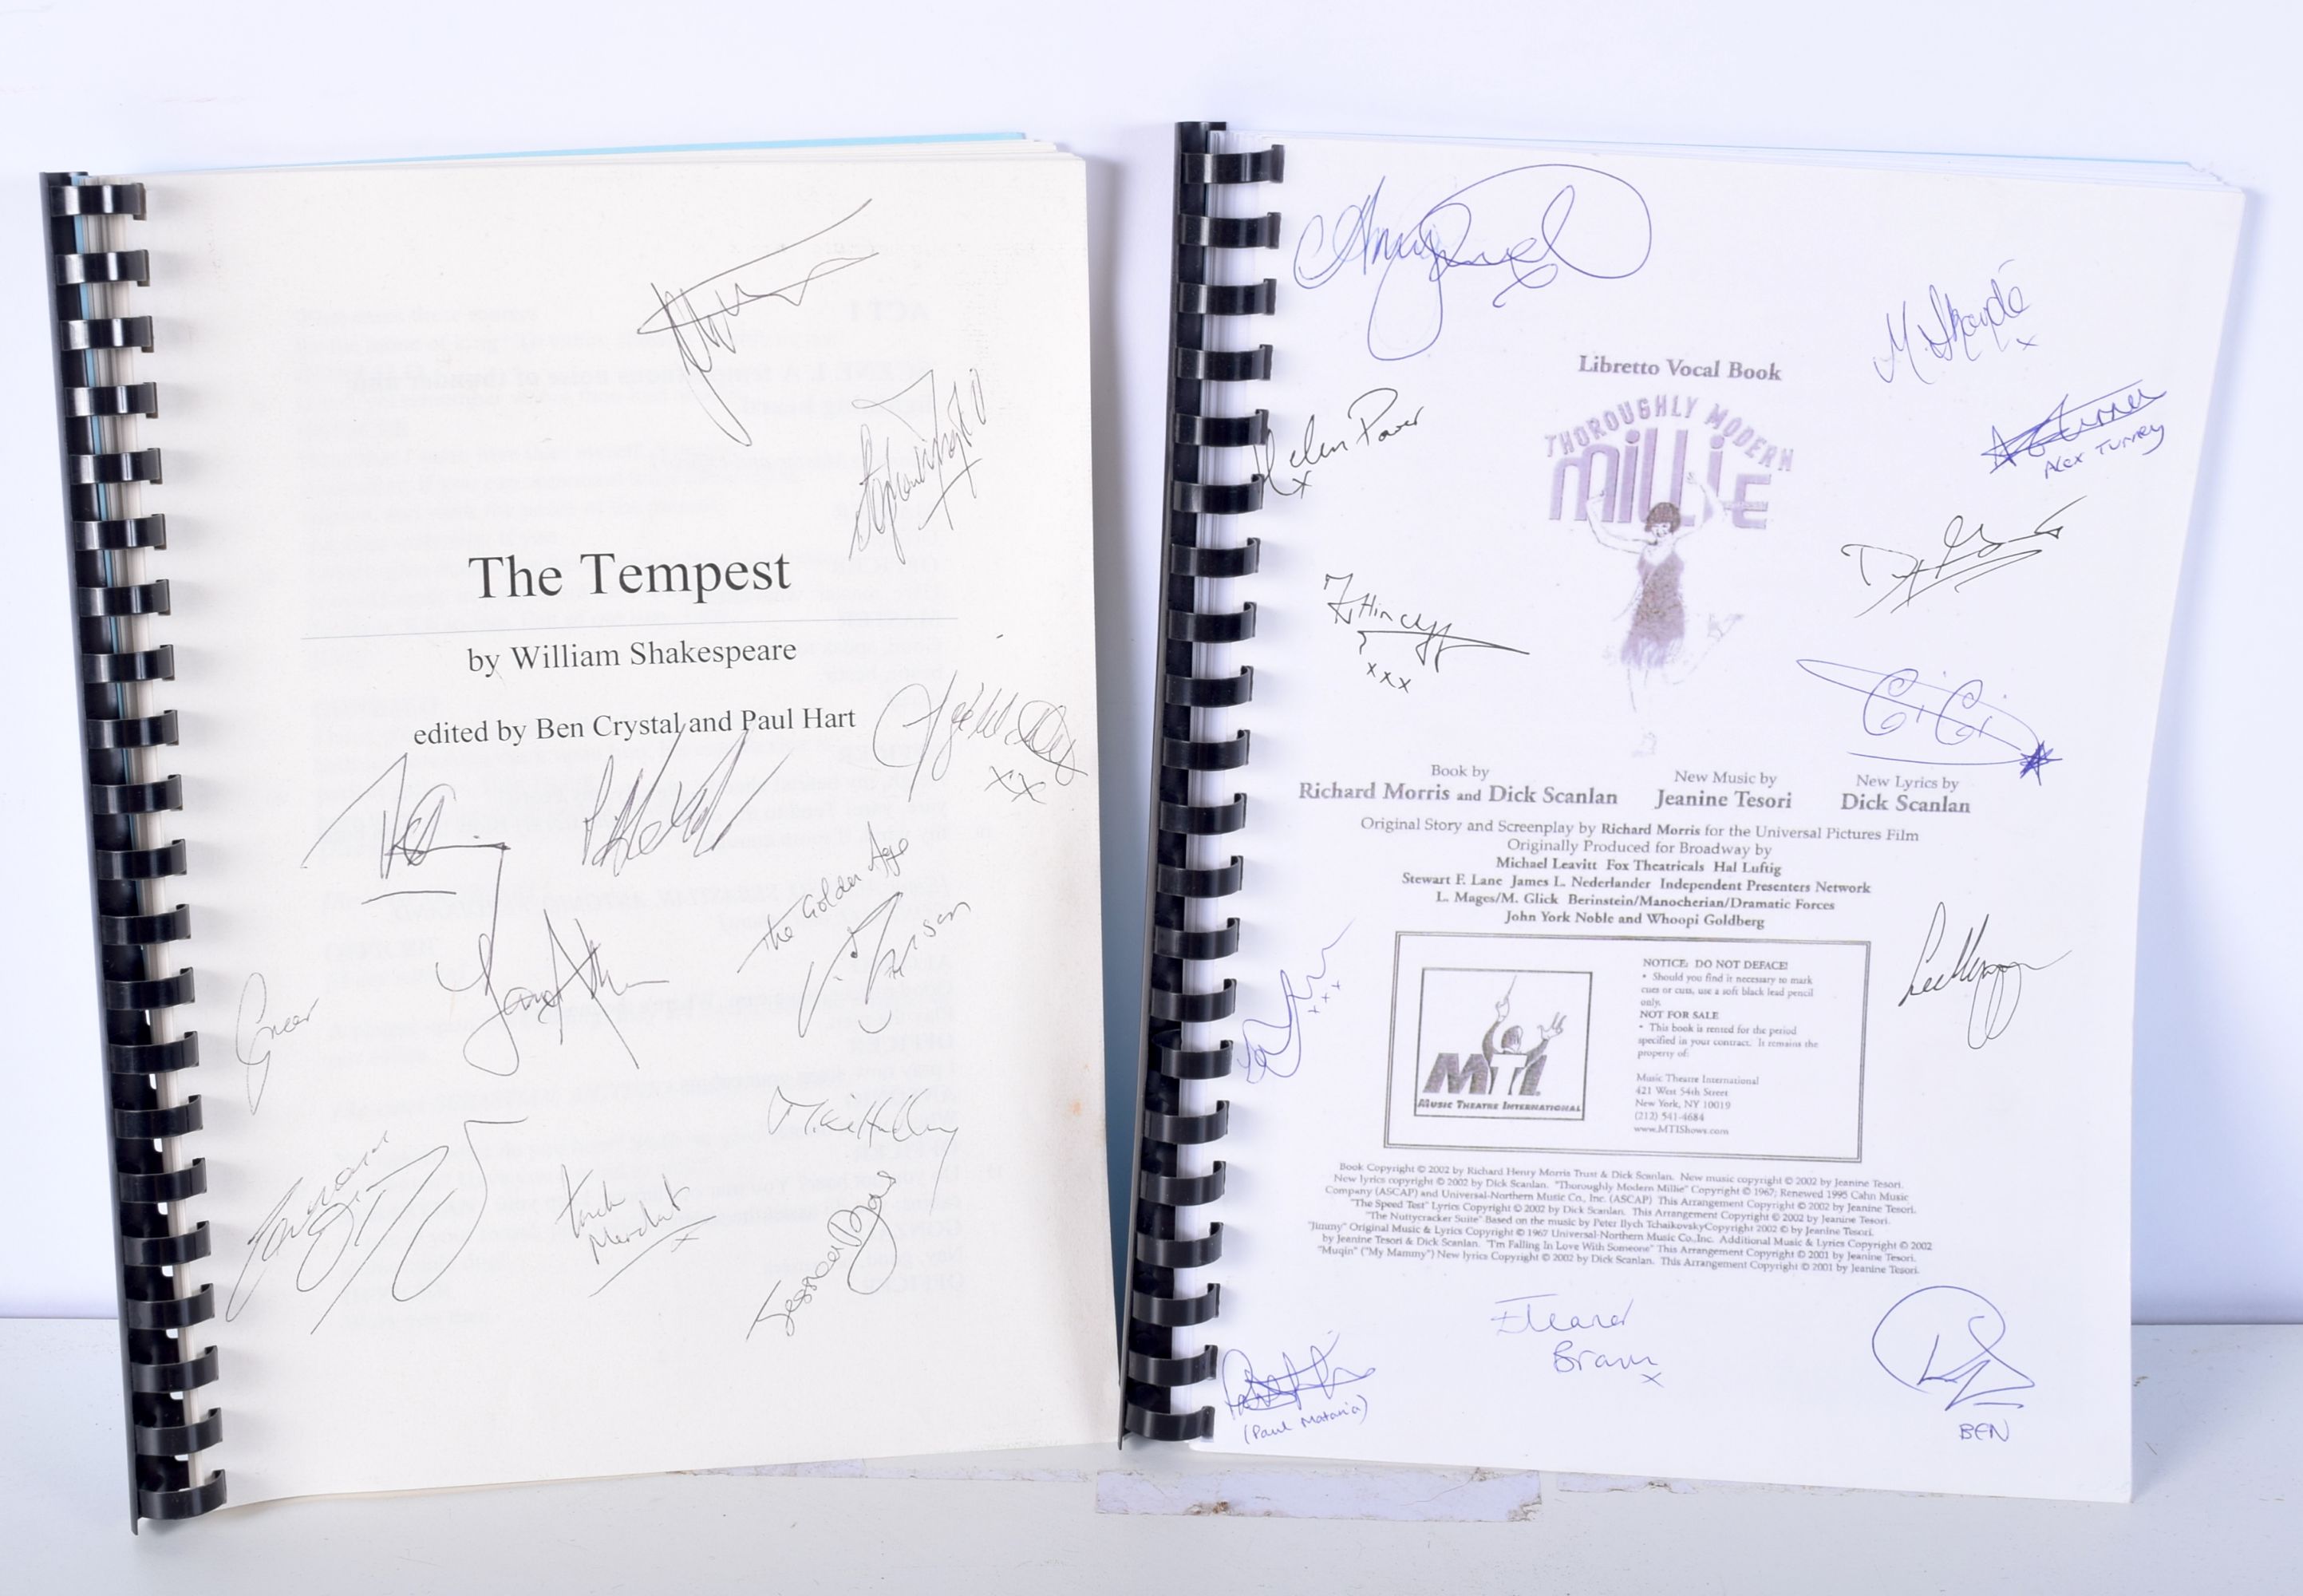 An autographed script of "The Tempest" by Shakespeare together with an autographed vocal book for "T